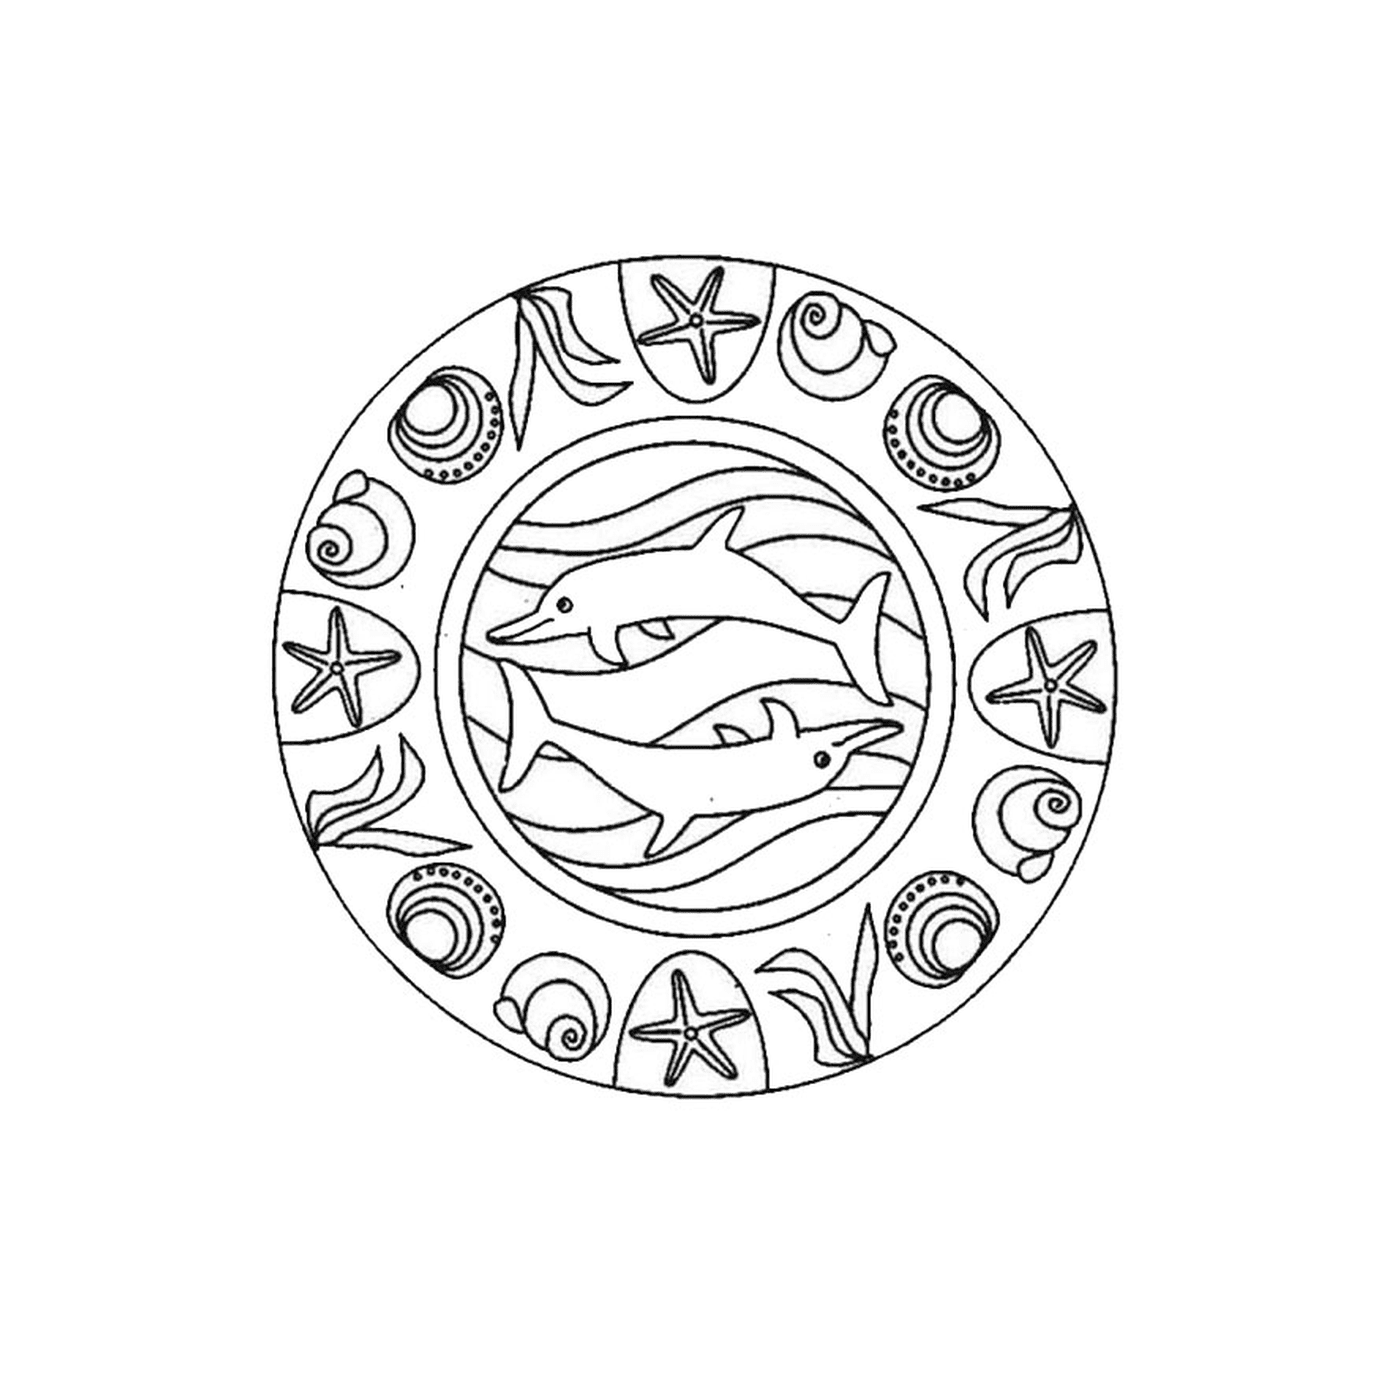  Two dolphins swimming in a seashell mandala 